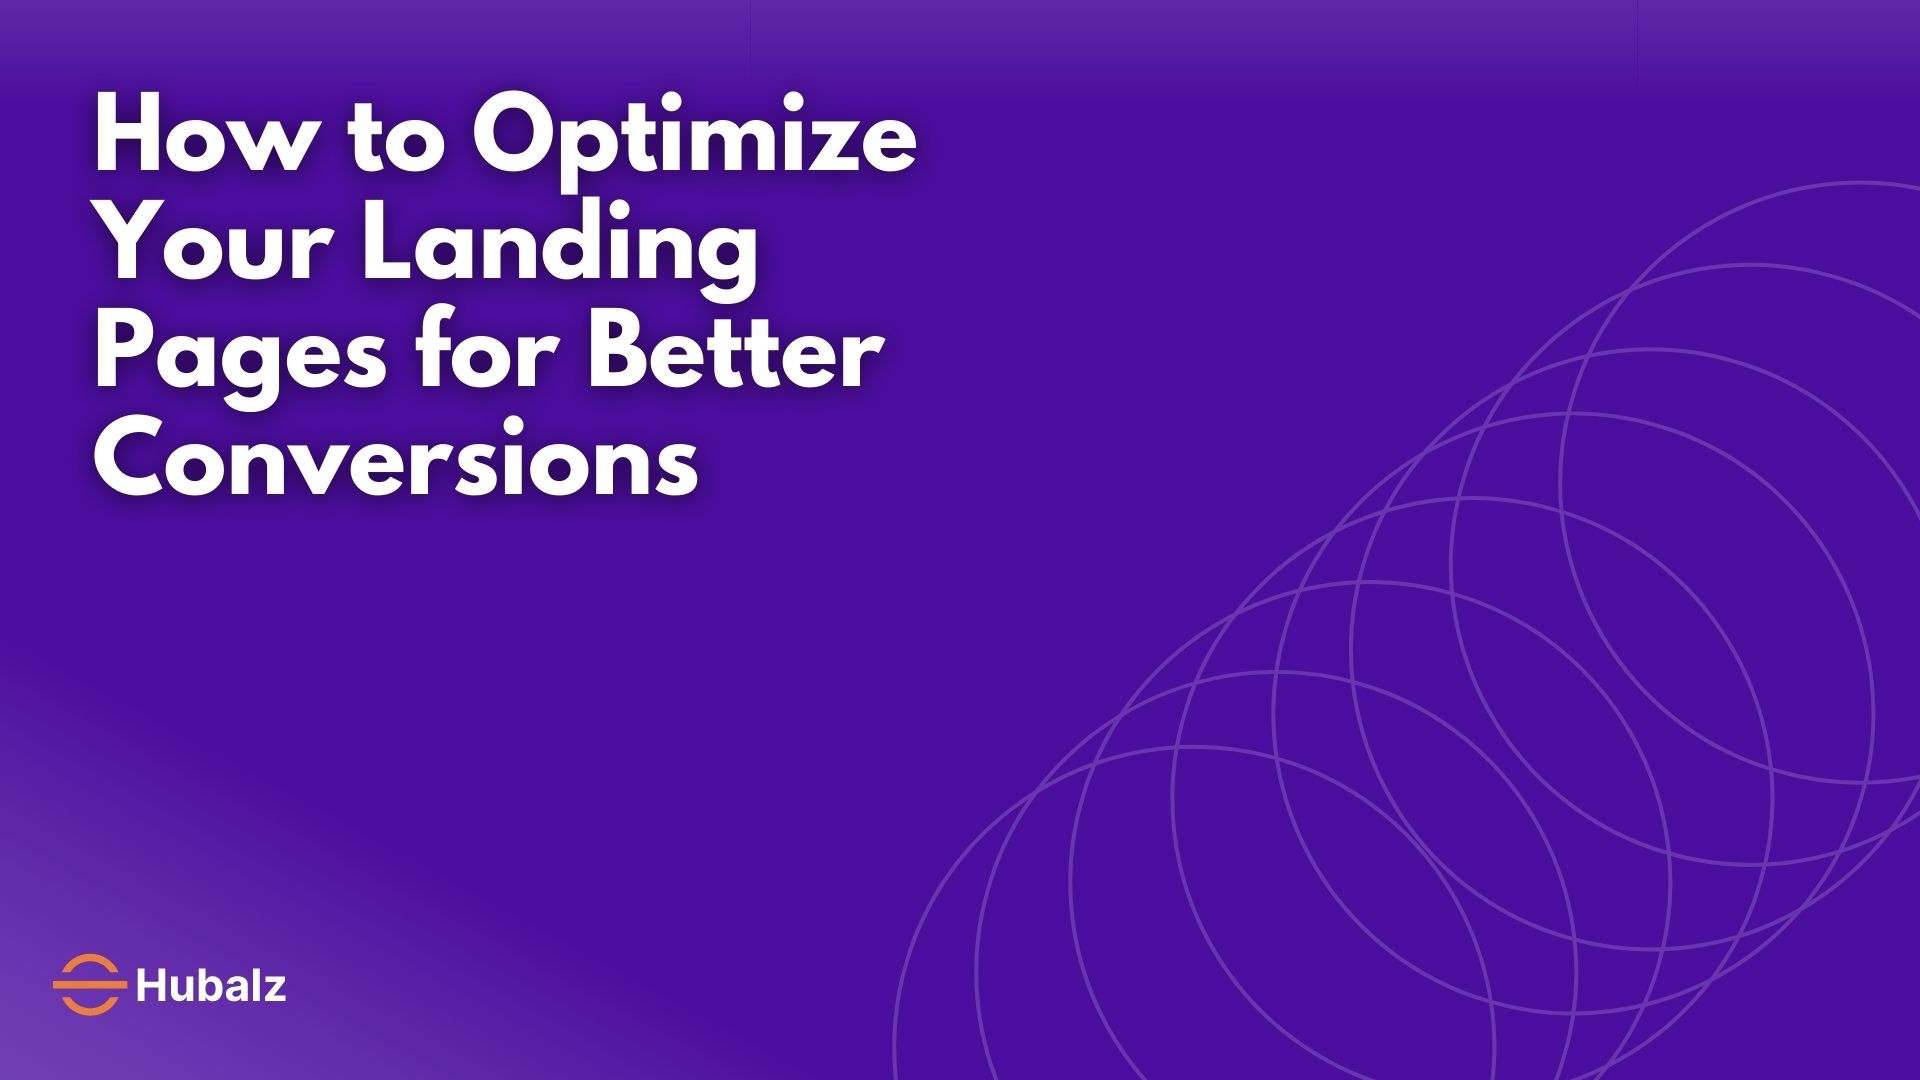 How to Optimize Your Landing Pages for Better Conversions